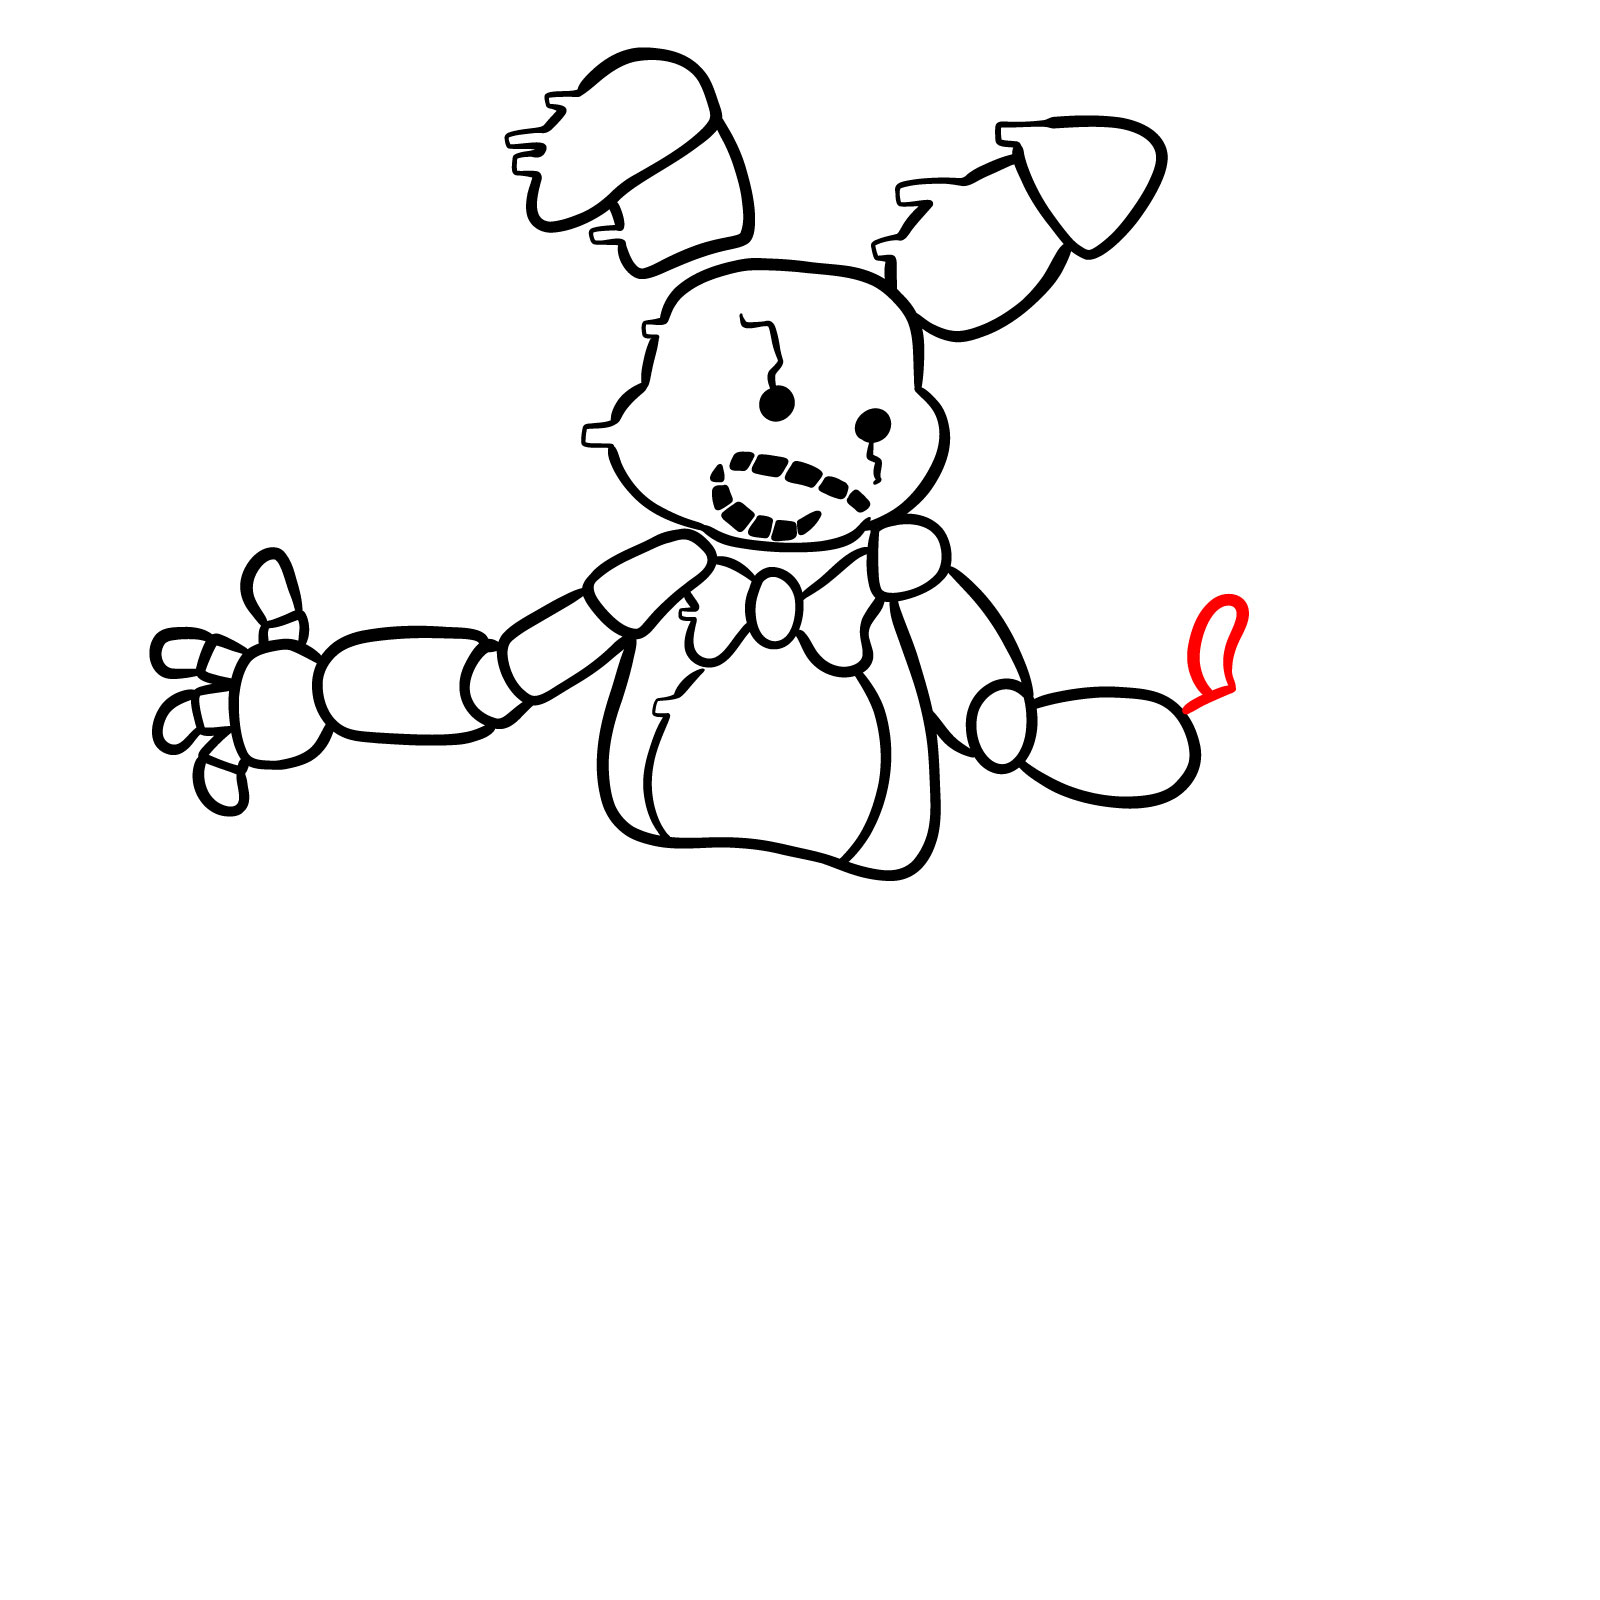 How to draw Shadow Bonnie from FNF: Glitched Legends - step 22